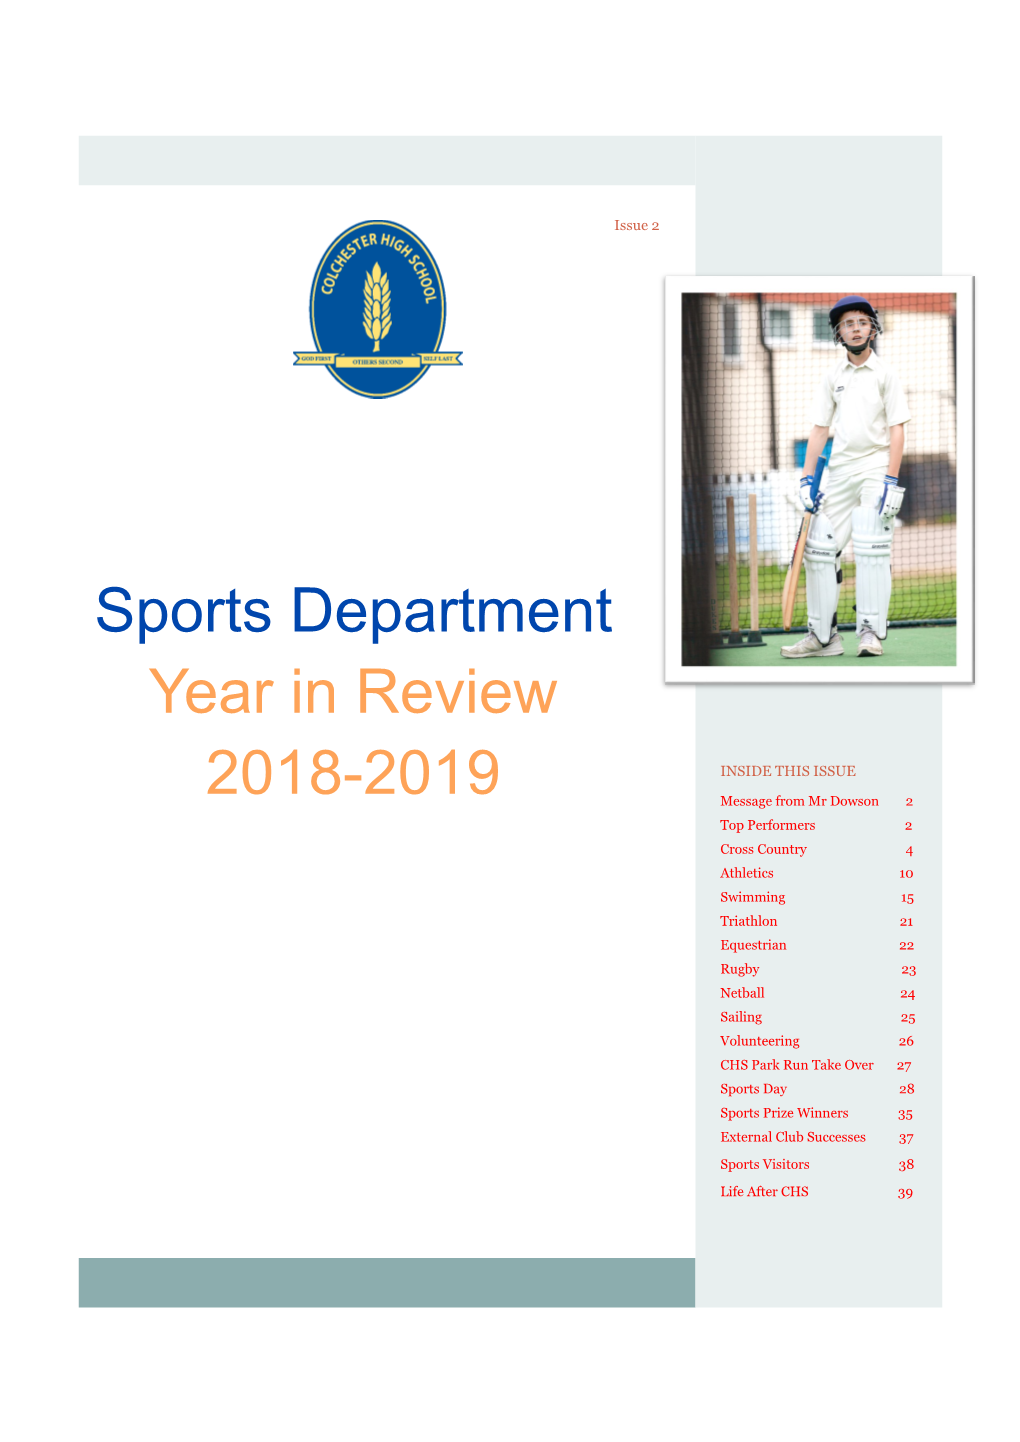 Sports Department Year in Review 2018-2019